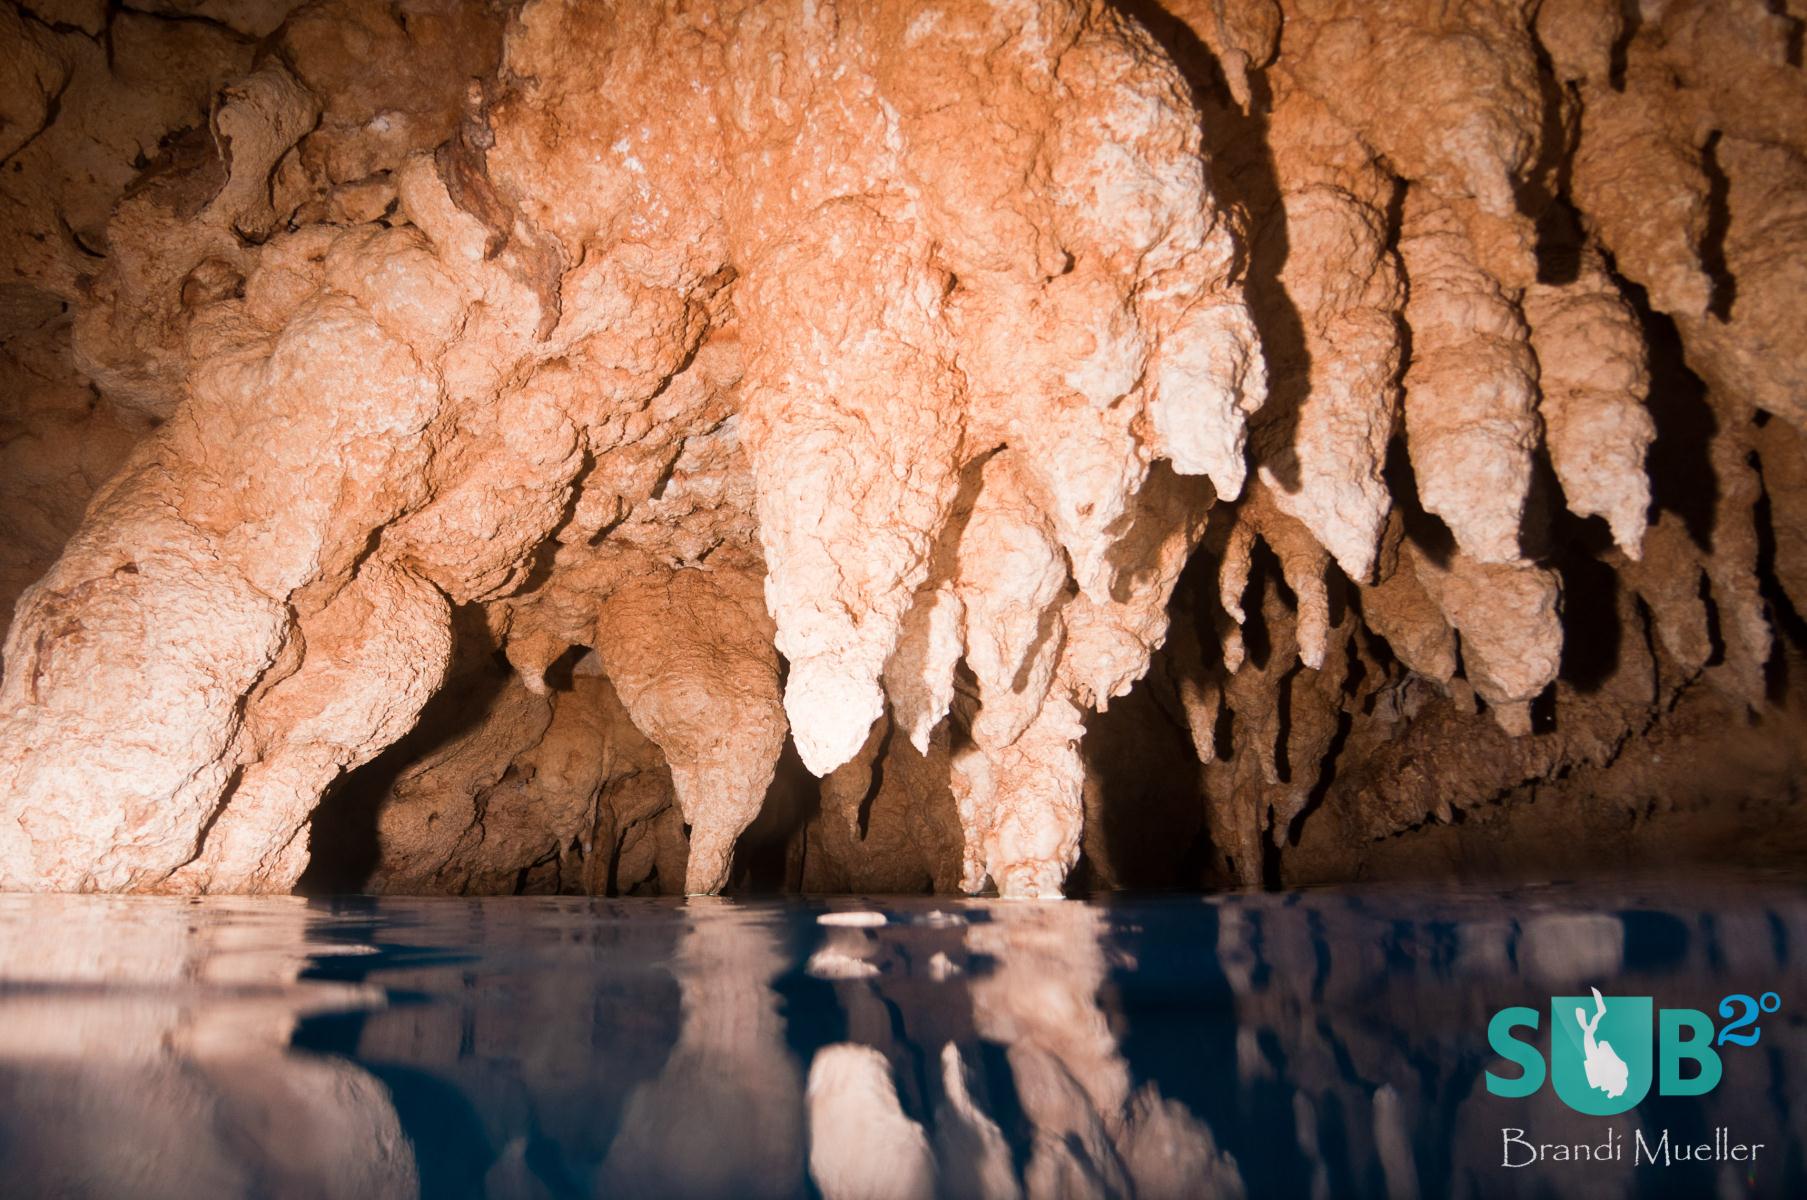 Chandelier Caves has three air pockets where divers can stick their heads up and breathe.  The limestone stalagmites and stalactites make for an interesting dive. 